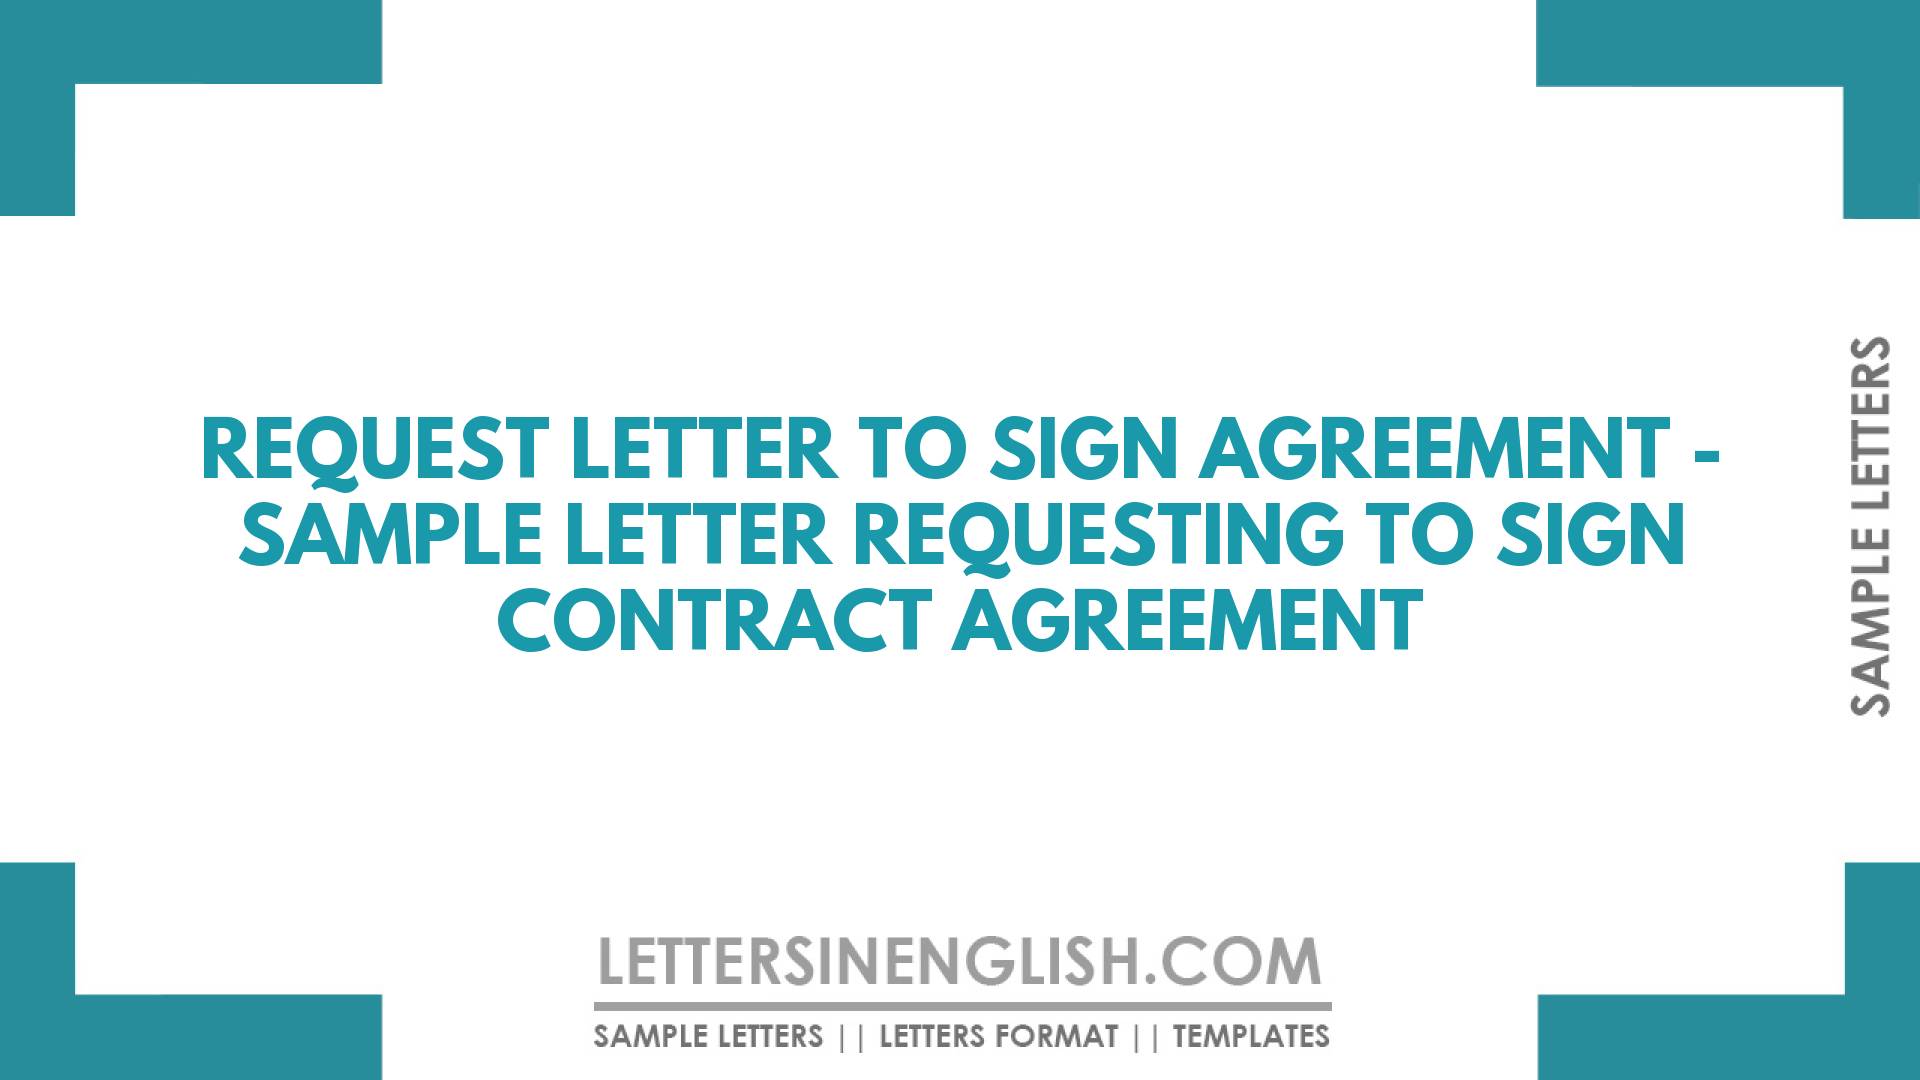 Request Letter to Sign Agreement – Sample Letter Requesting to Sign Contract Agreement